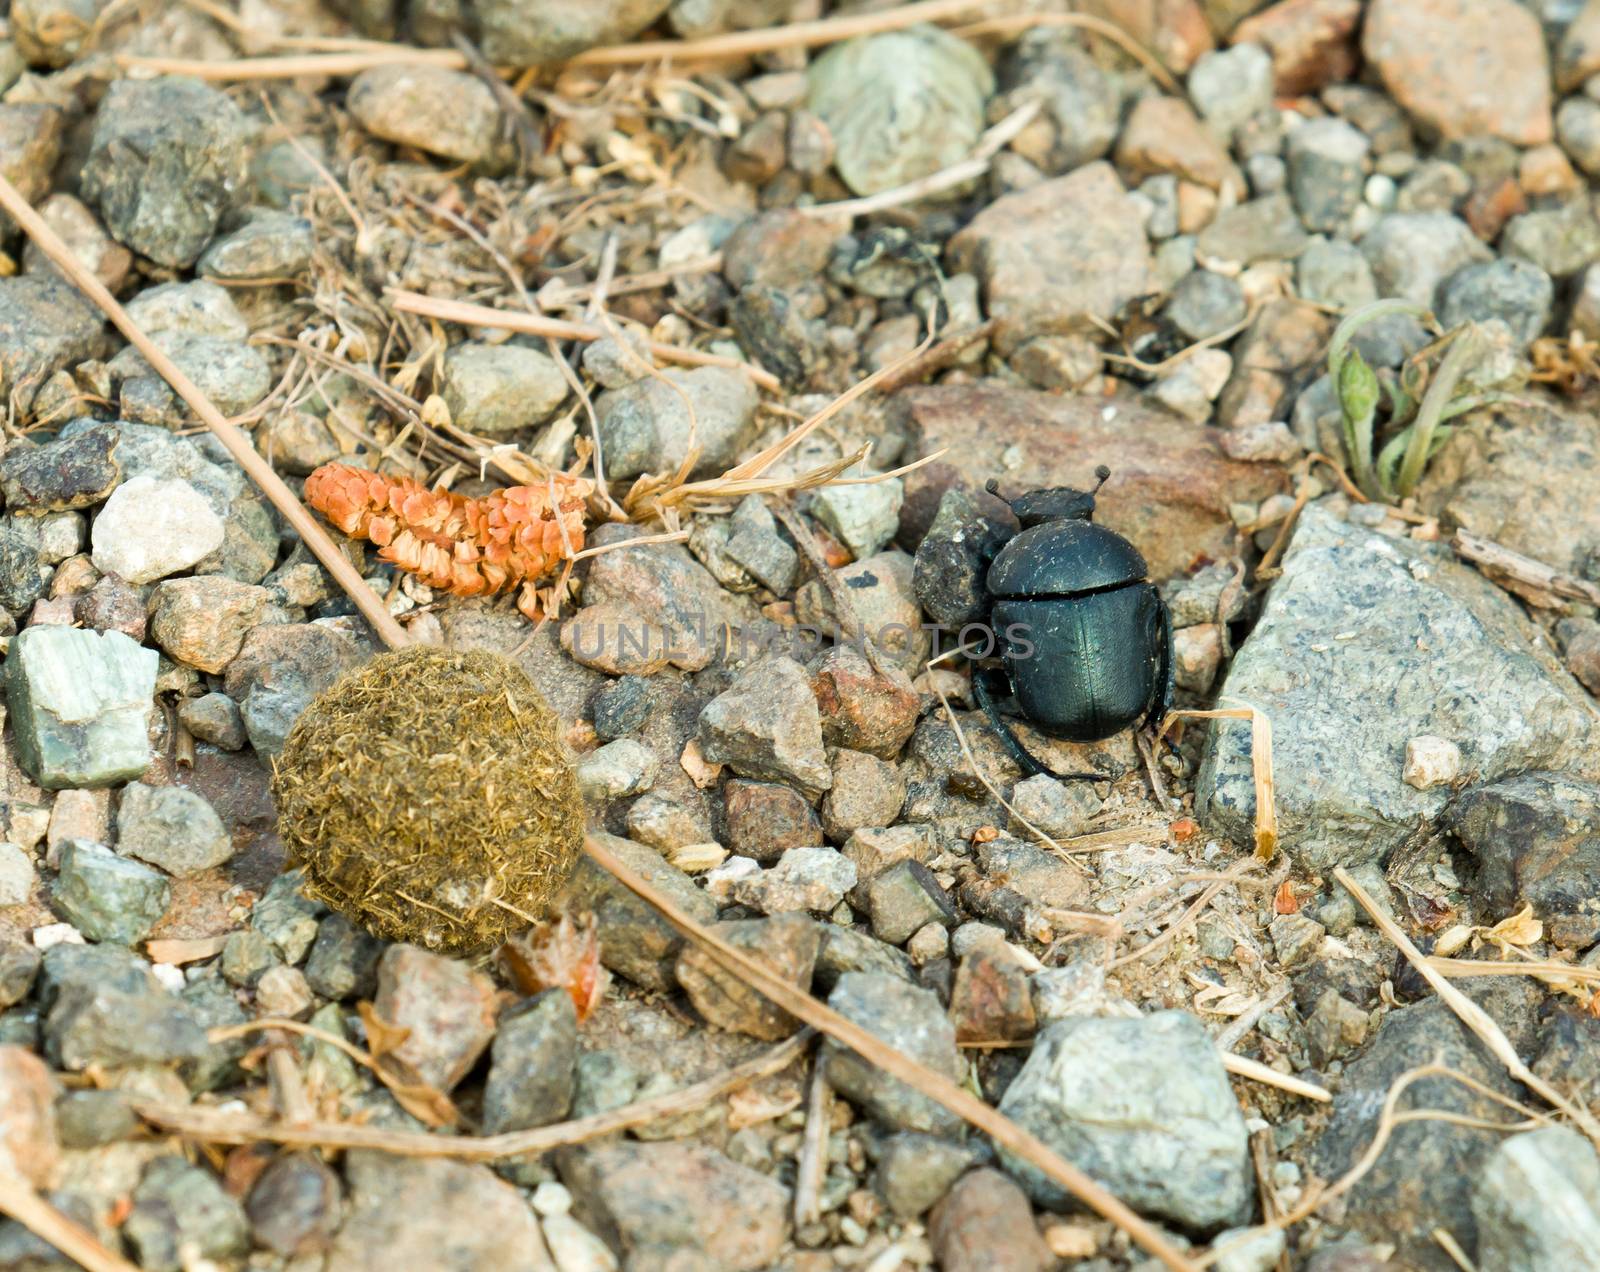 Male Dung Beetle looking for suitable place to bury dung ball for female to lay eggs inside.